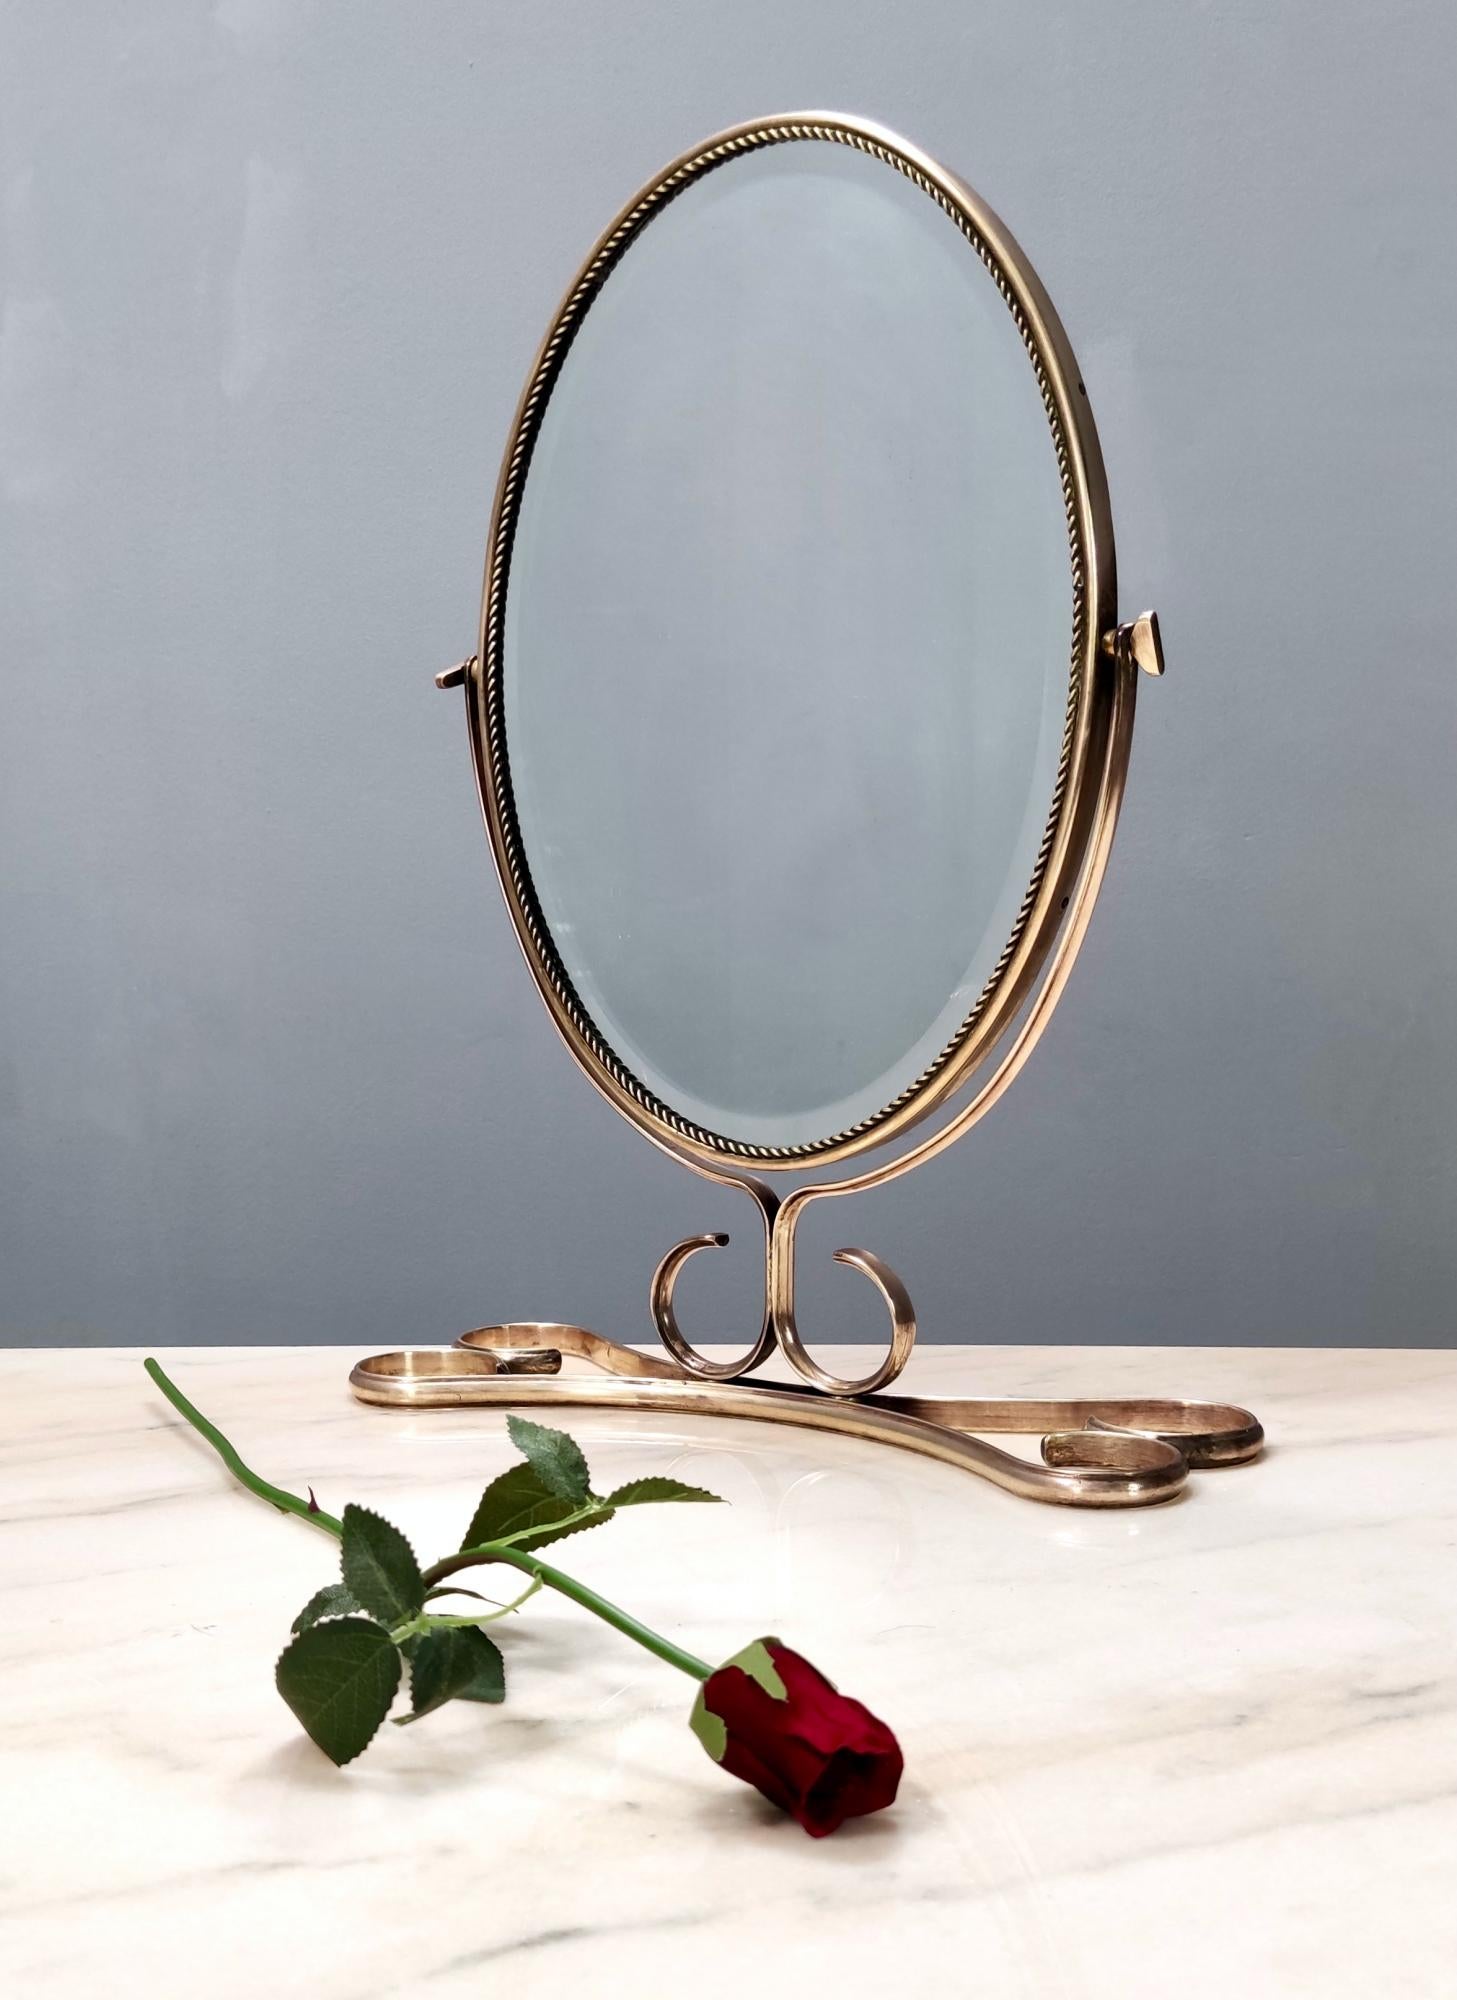 Italy, 1950s. 
It features a handmade brass frame, a wooden back and a beveled mirror.
This mirror is a vintage piece, therefore it might show slight traces of use, but it can be considered as in excellent original condition and ready to become a